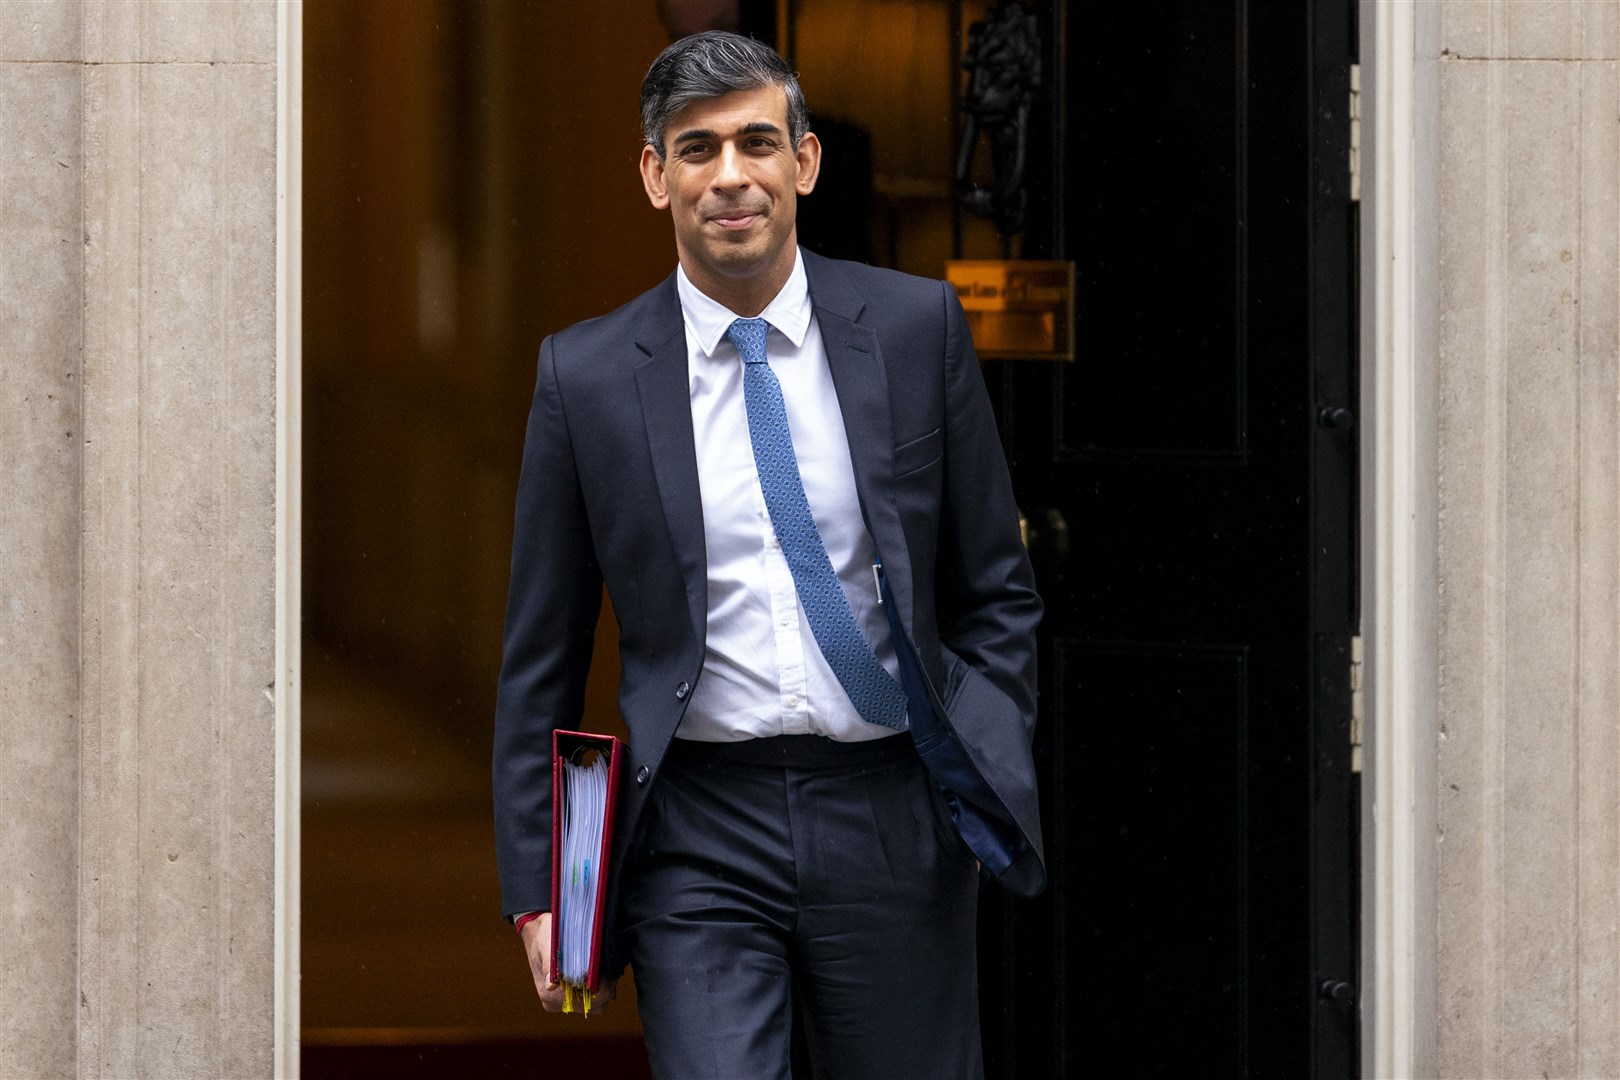 Prime Minister Rishi Sunak departing 10 Downing Street, London, to attend Prime Minister’s Questions at the Houses of Parliament on Wednesday (Jordan Pettitt/PA)